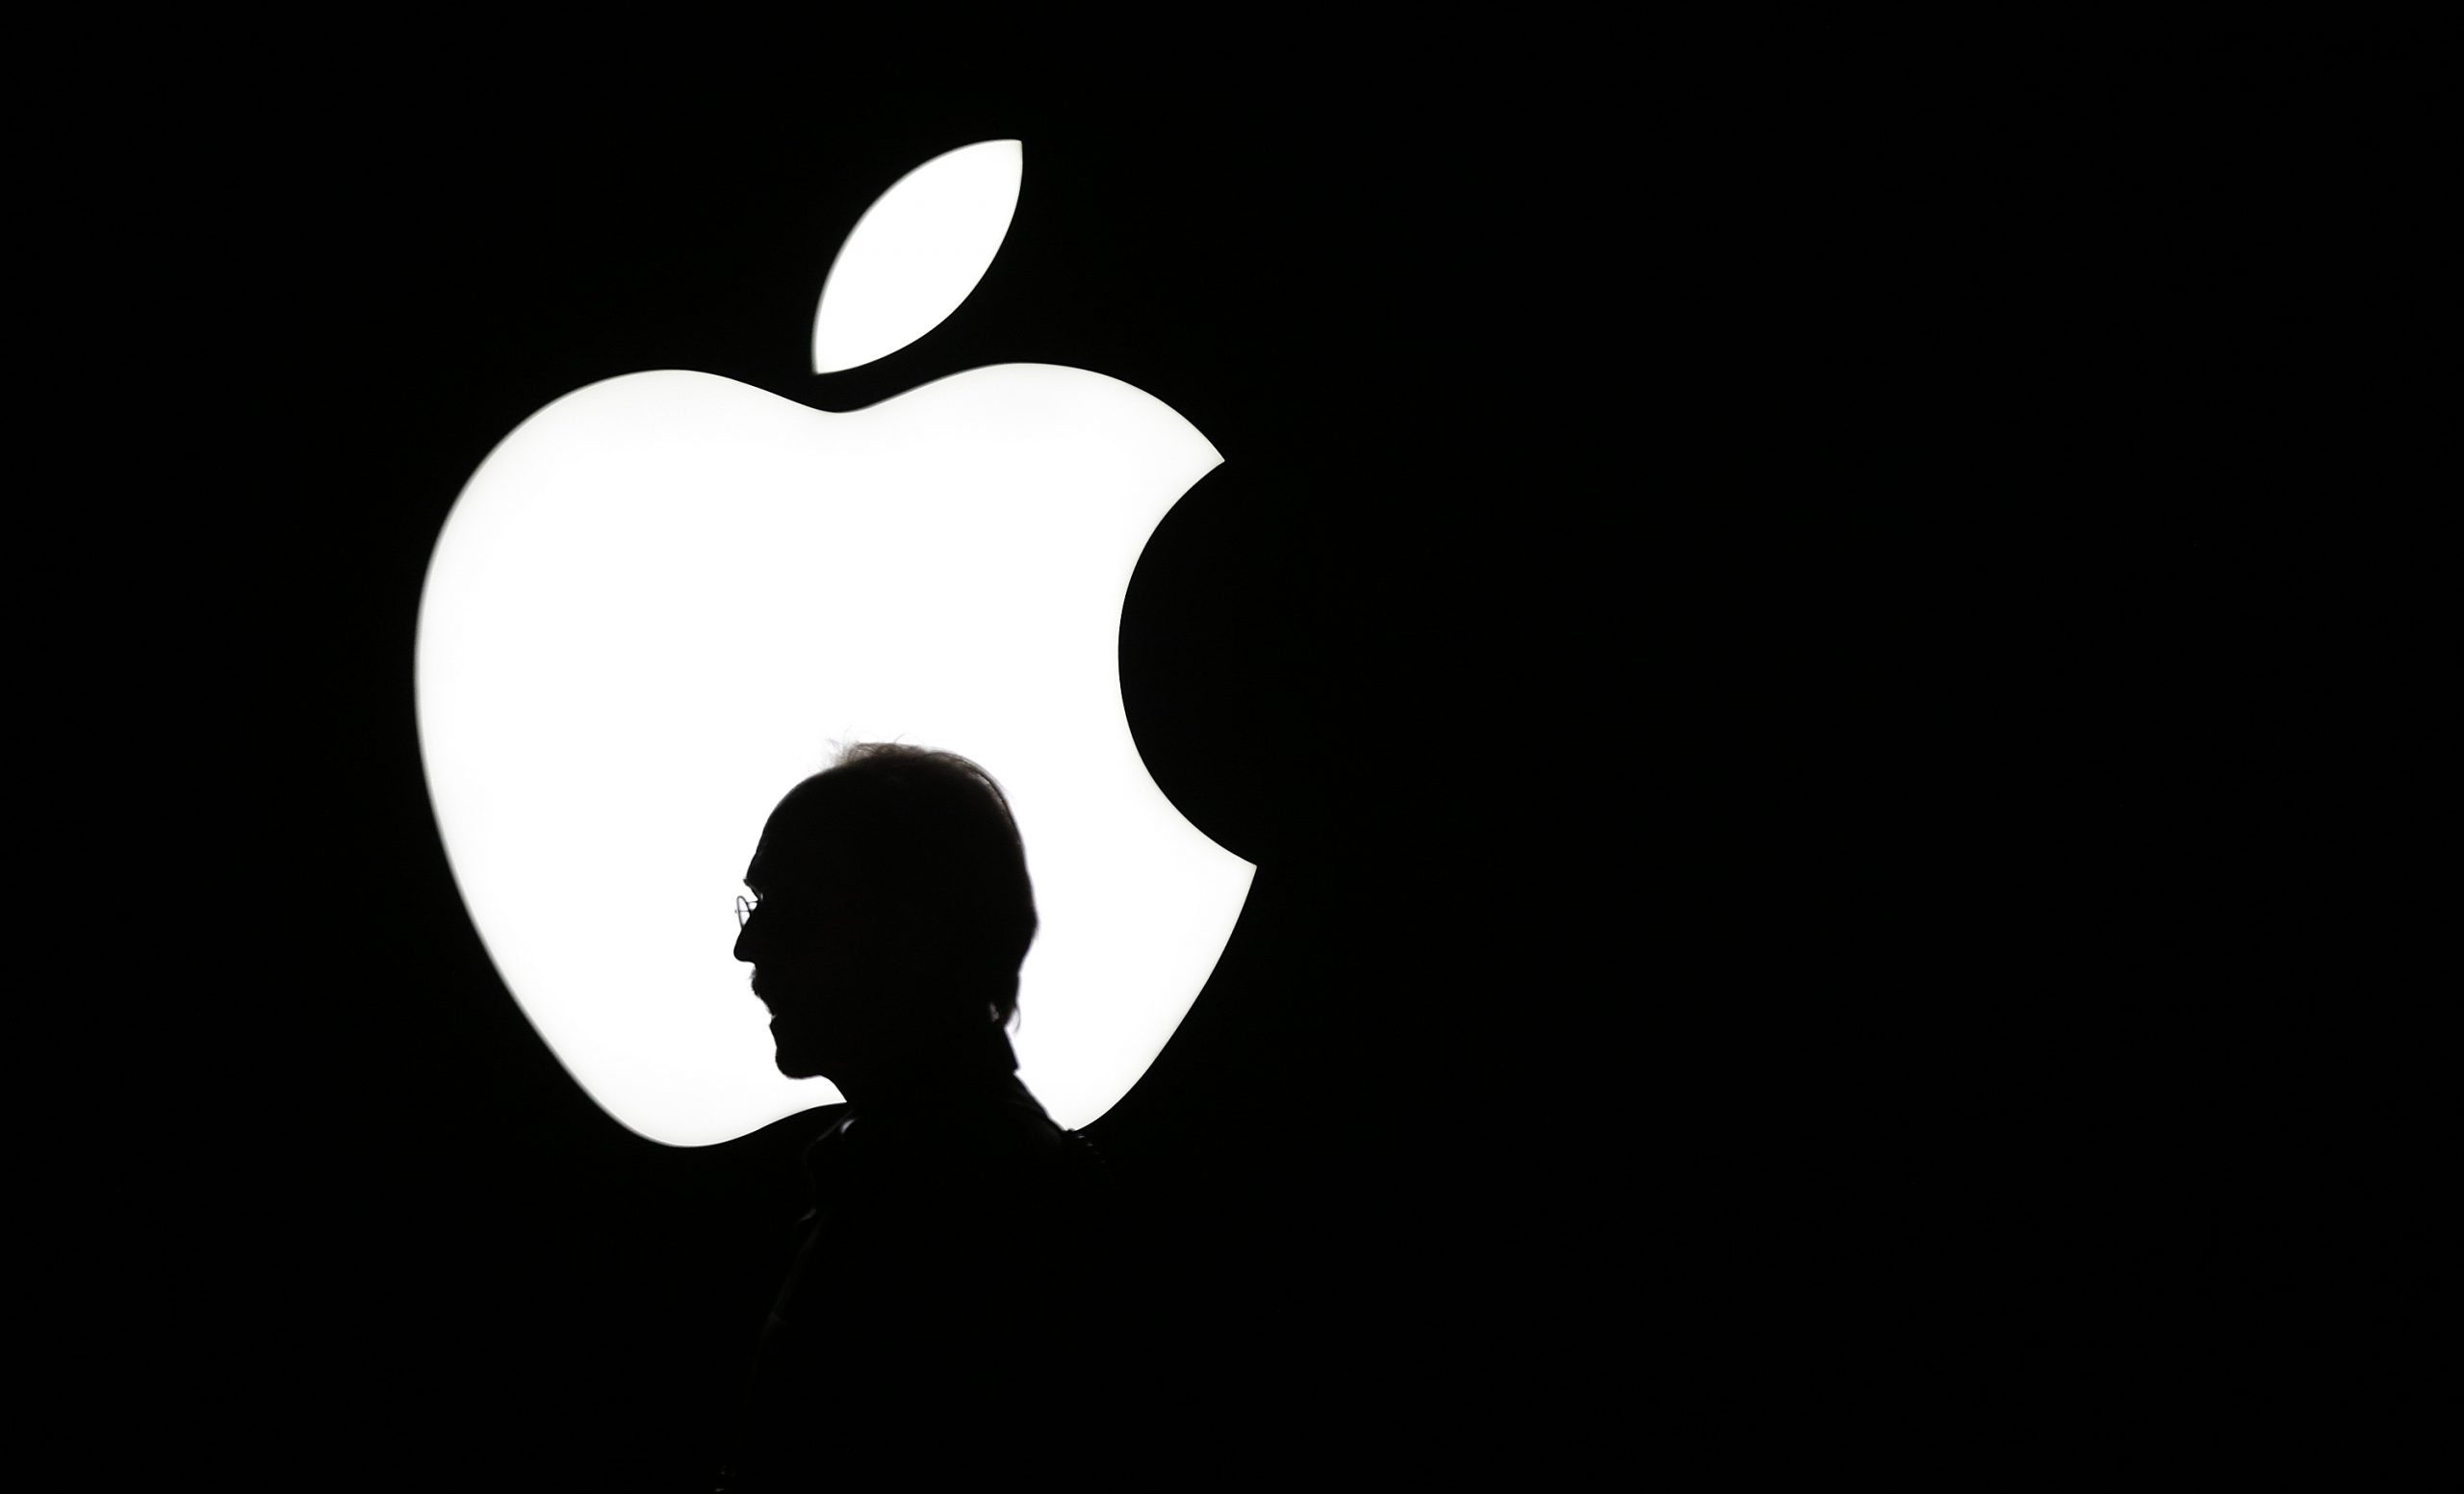 Apple shares have lost an average of 0.4 percent on the day of the keynote event (Photo: AP)